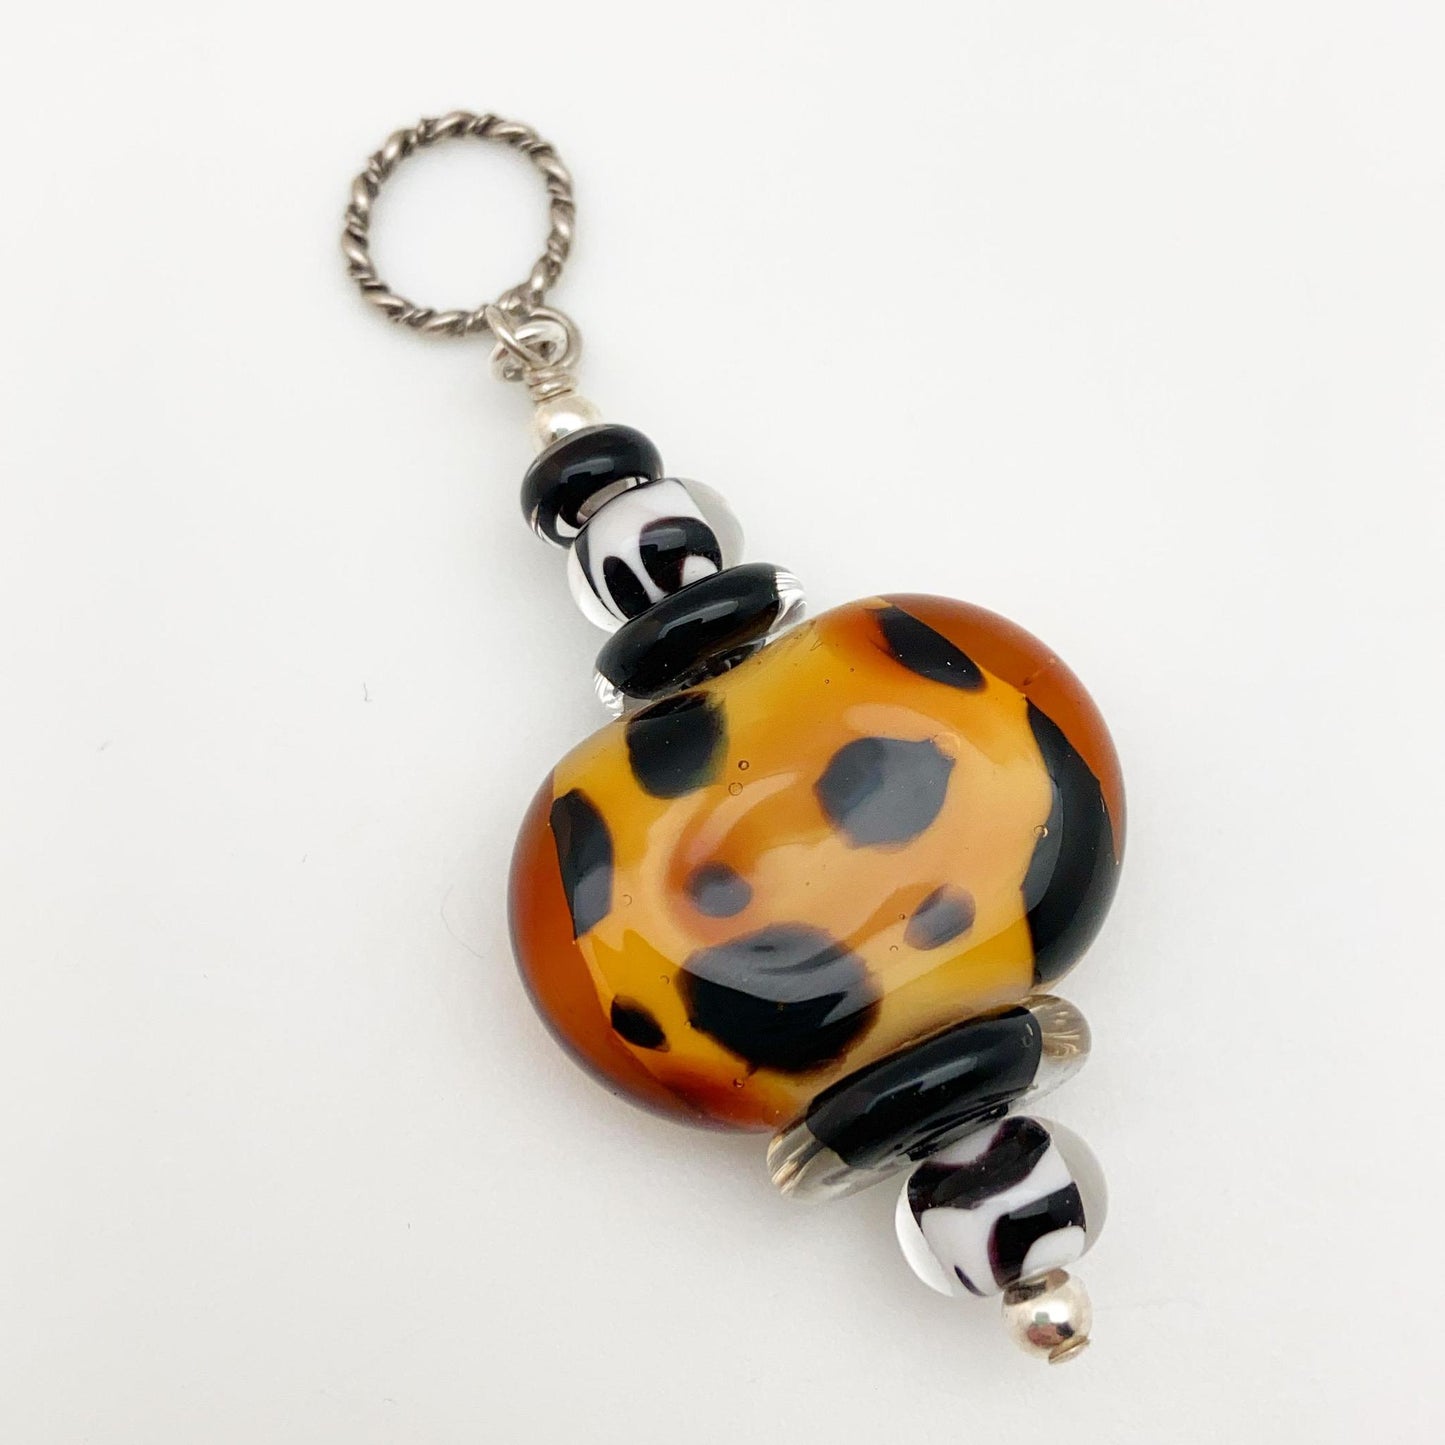 Pendant - Flat and Multicolored - Handmade Glass Beads